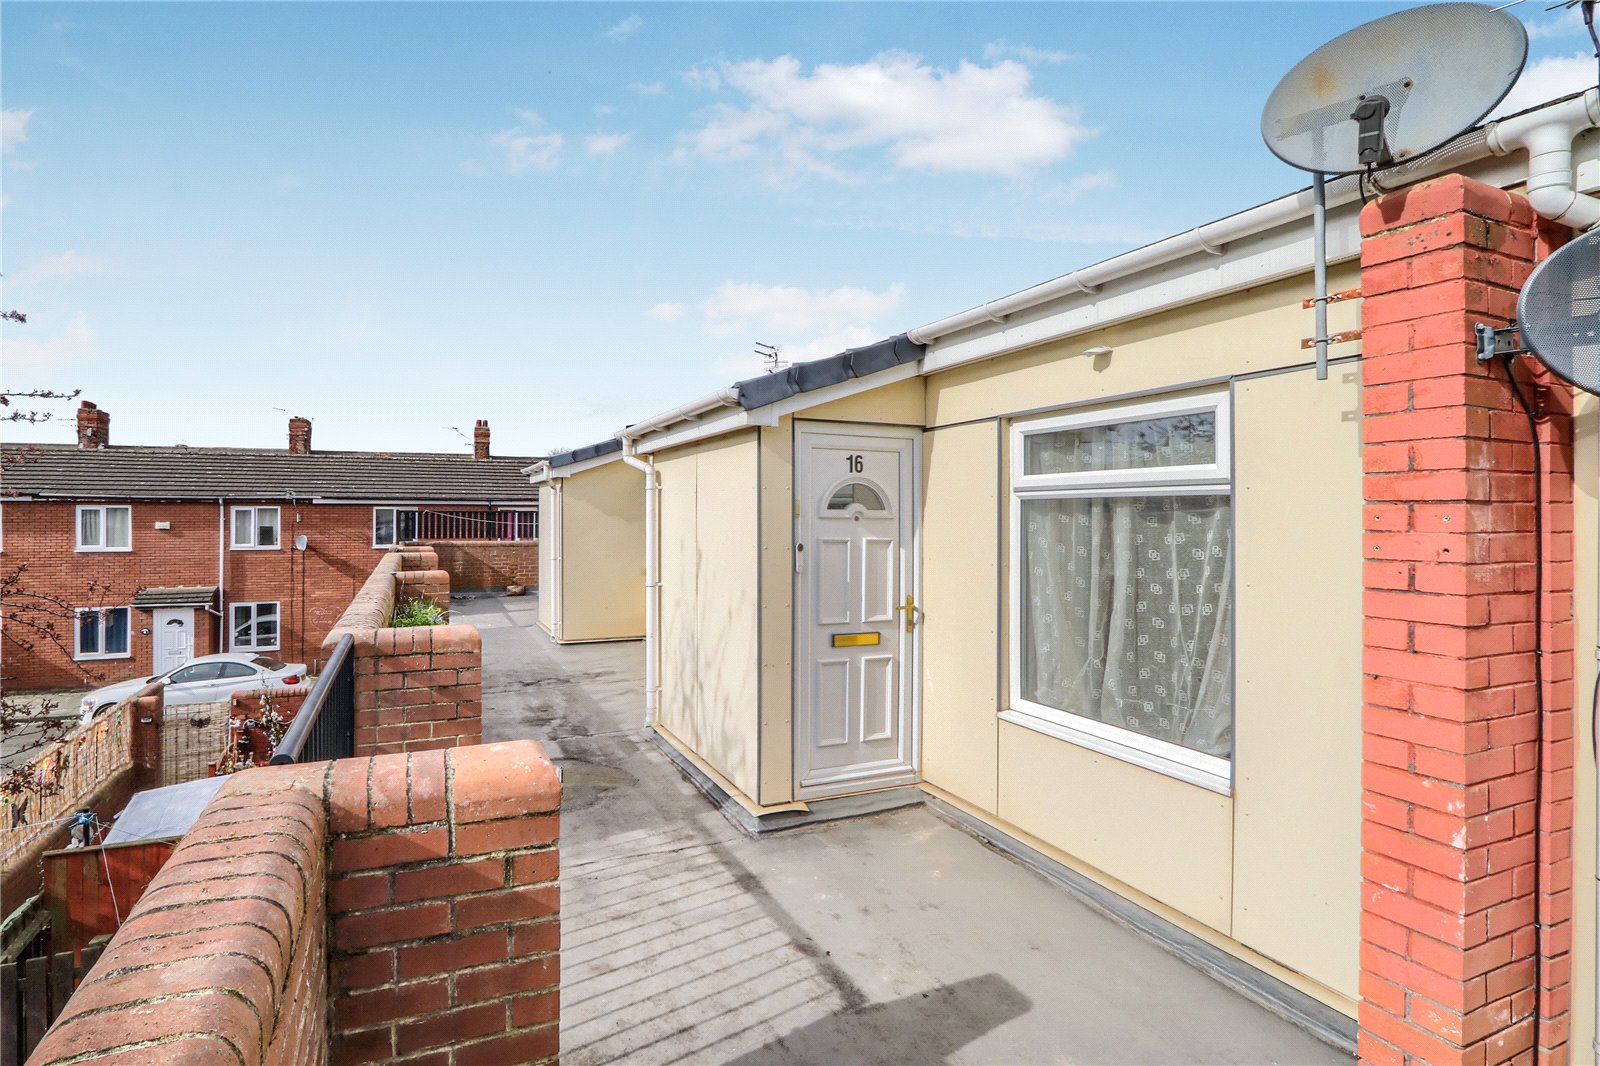 1 bed apartment for sale in Palmerston Street, Stockton-on-Tees 1